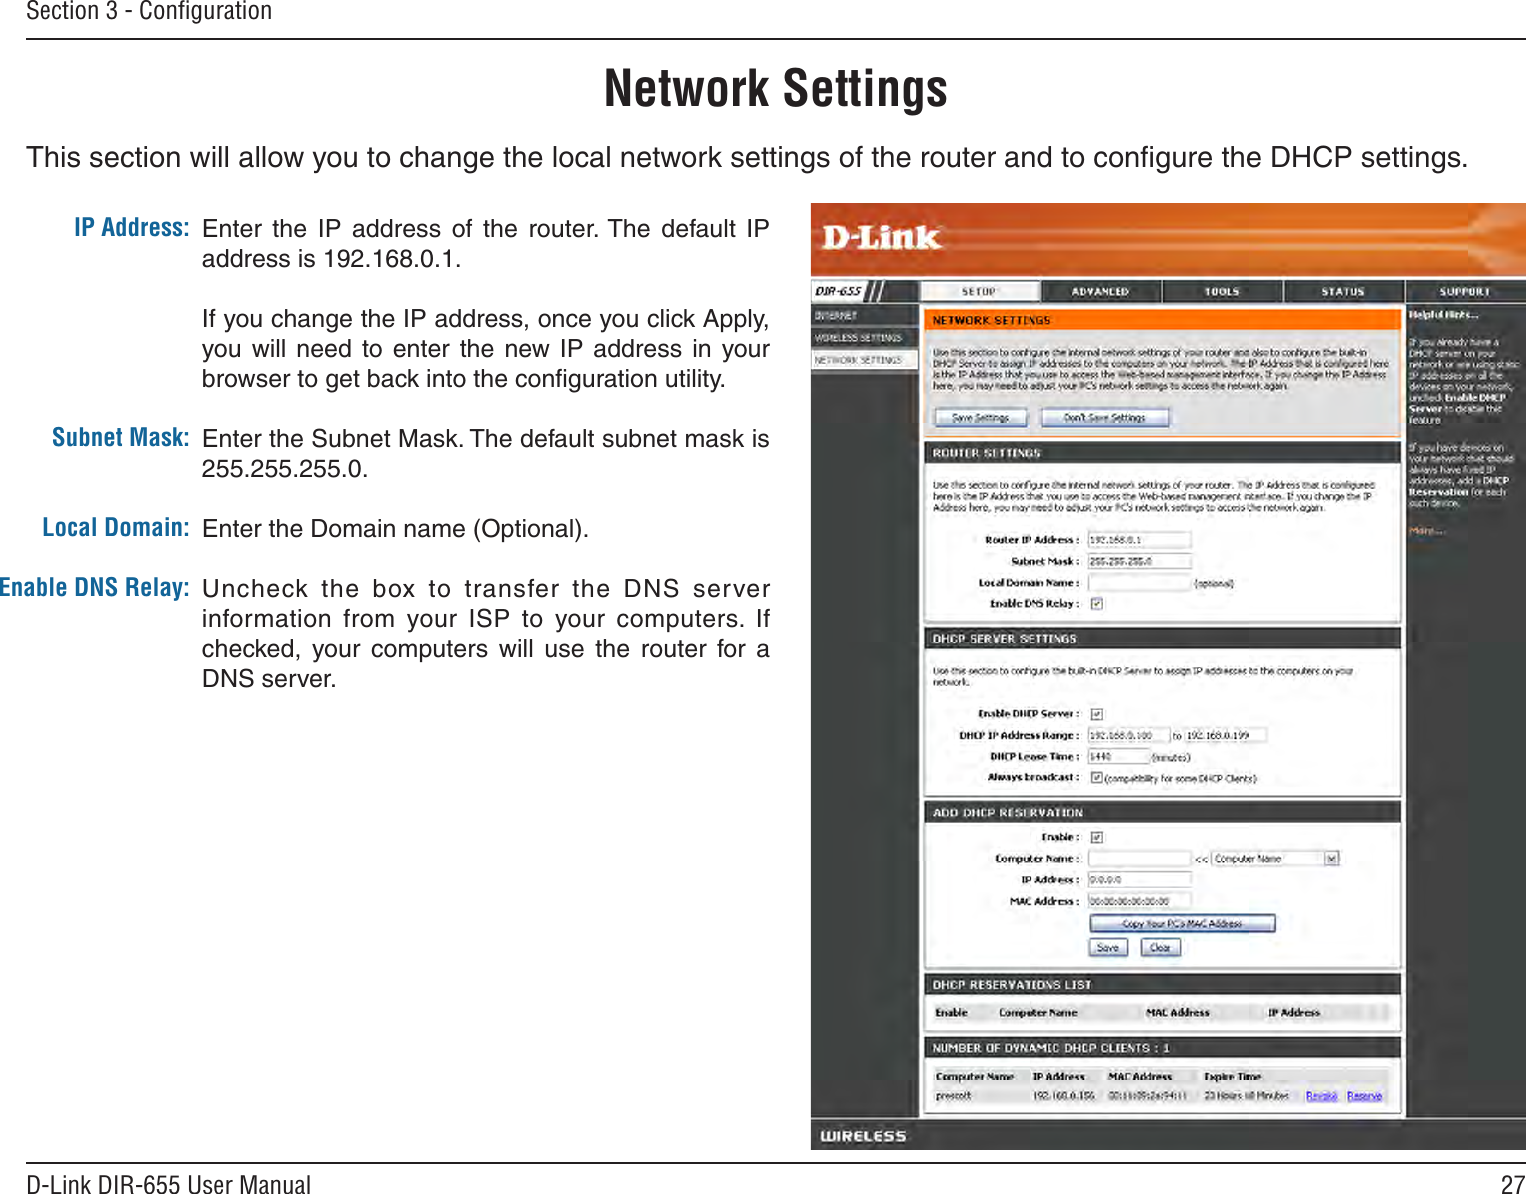 27D-Link DIR-655 User ManualSection 3 - ConﬁgurationThis section will allow you to change the local network settings of the router and to conﬁgure the DHCP settings.Network SettingsEnter  the  IP  address  of  the  router. The  default  IP address is 192.168.0.1.If you change the IP address, once you click Apply, you will need  to  enter the  new  IP  address  in your browser to get back into the conﬁguration utility.Enter the Subnet Mask. The default subnet mask is 255.255.255.0.Enter the Domain name (Optional).Uncheck the  box  to  transfer  the  DNS  server information  from  your  ISP  to  your  computers.  If checked,  your  computers  will  use  the  router  for  a DNS server.IP Address:Subnet Mask:Local Domain:Enable DNS Relay: